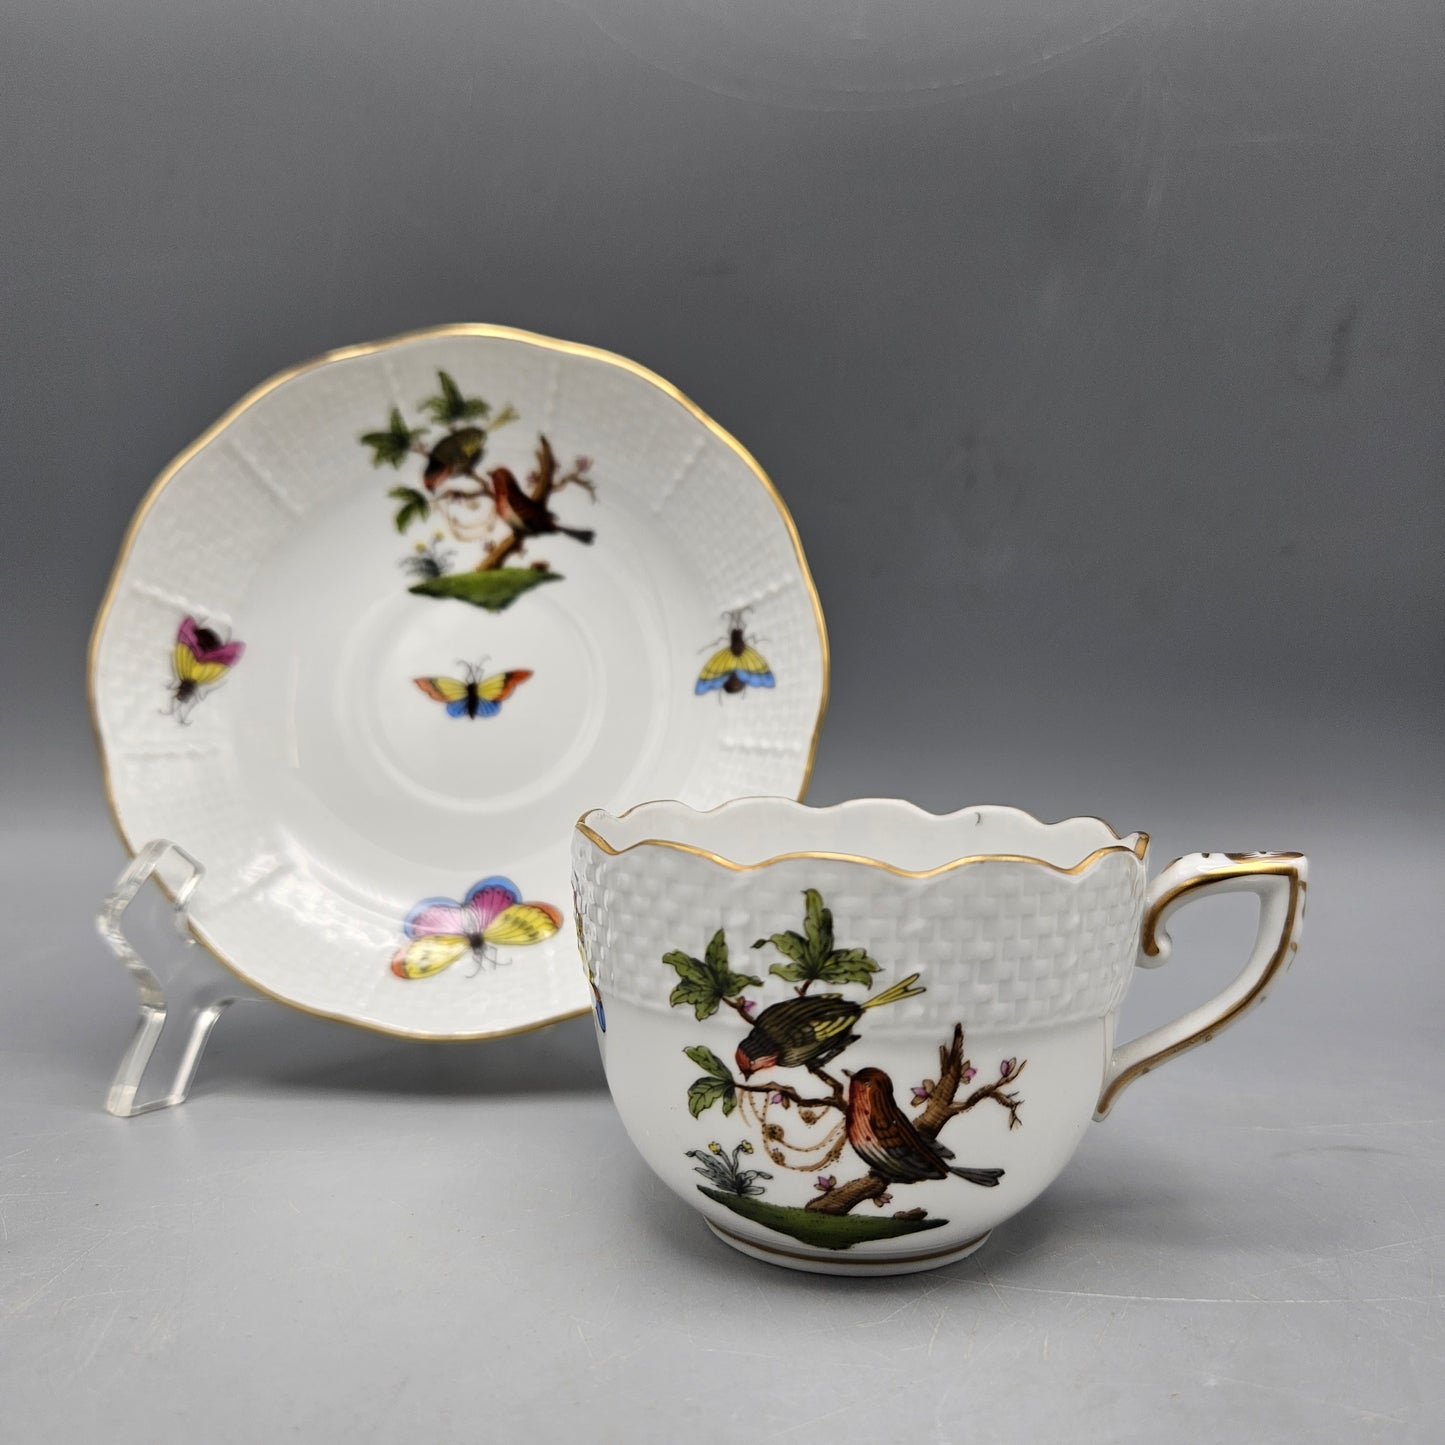 Herend Porcelain Rothschild Birds Coffee Cup & Saucer - 8 Available